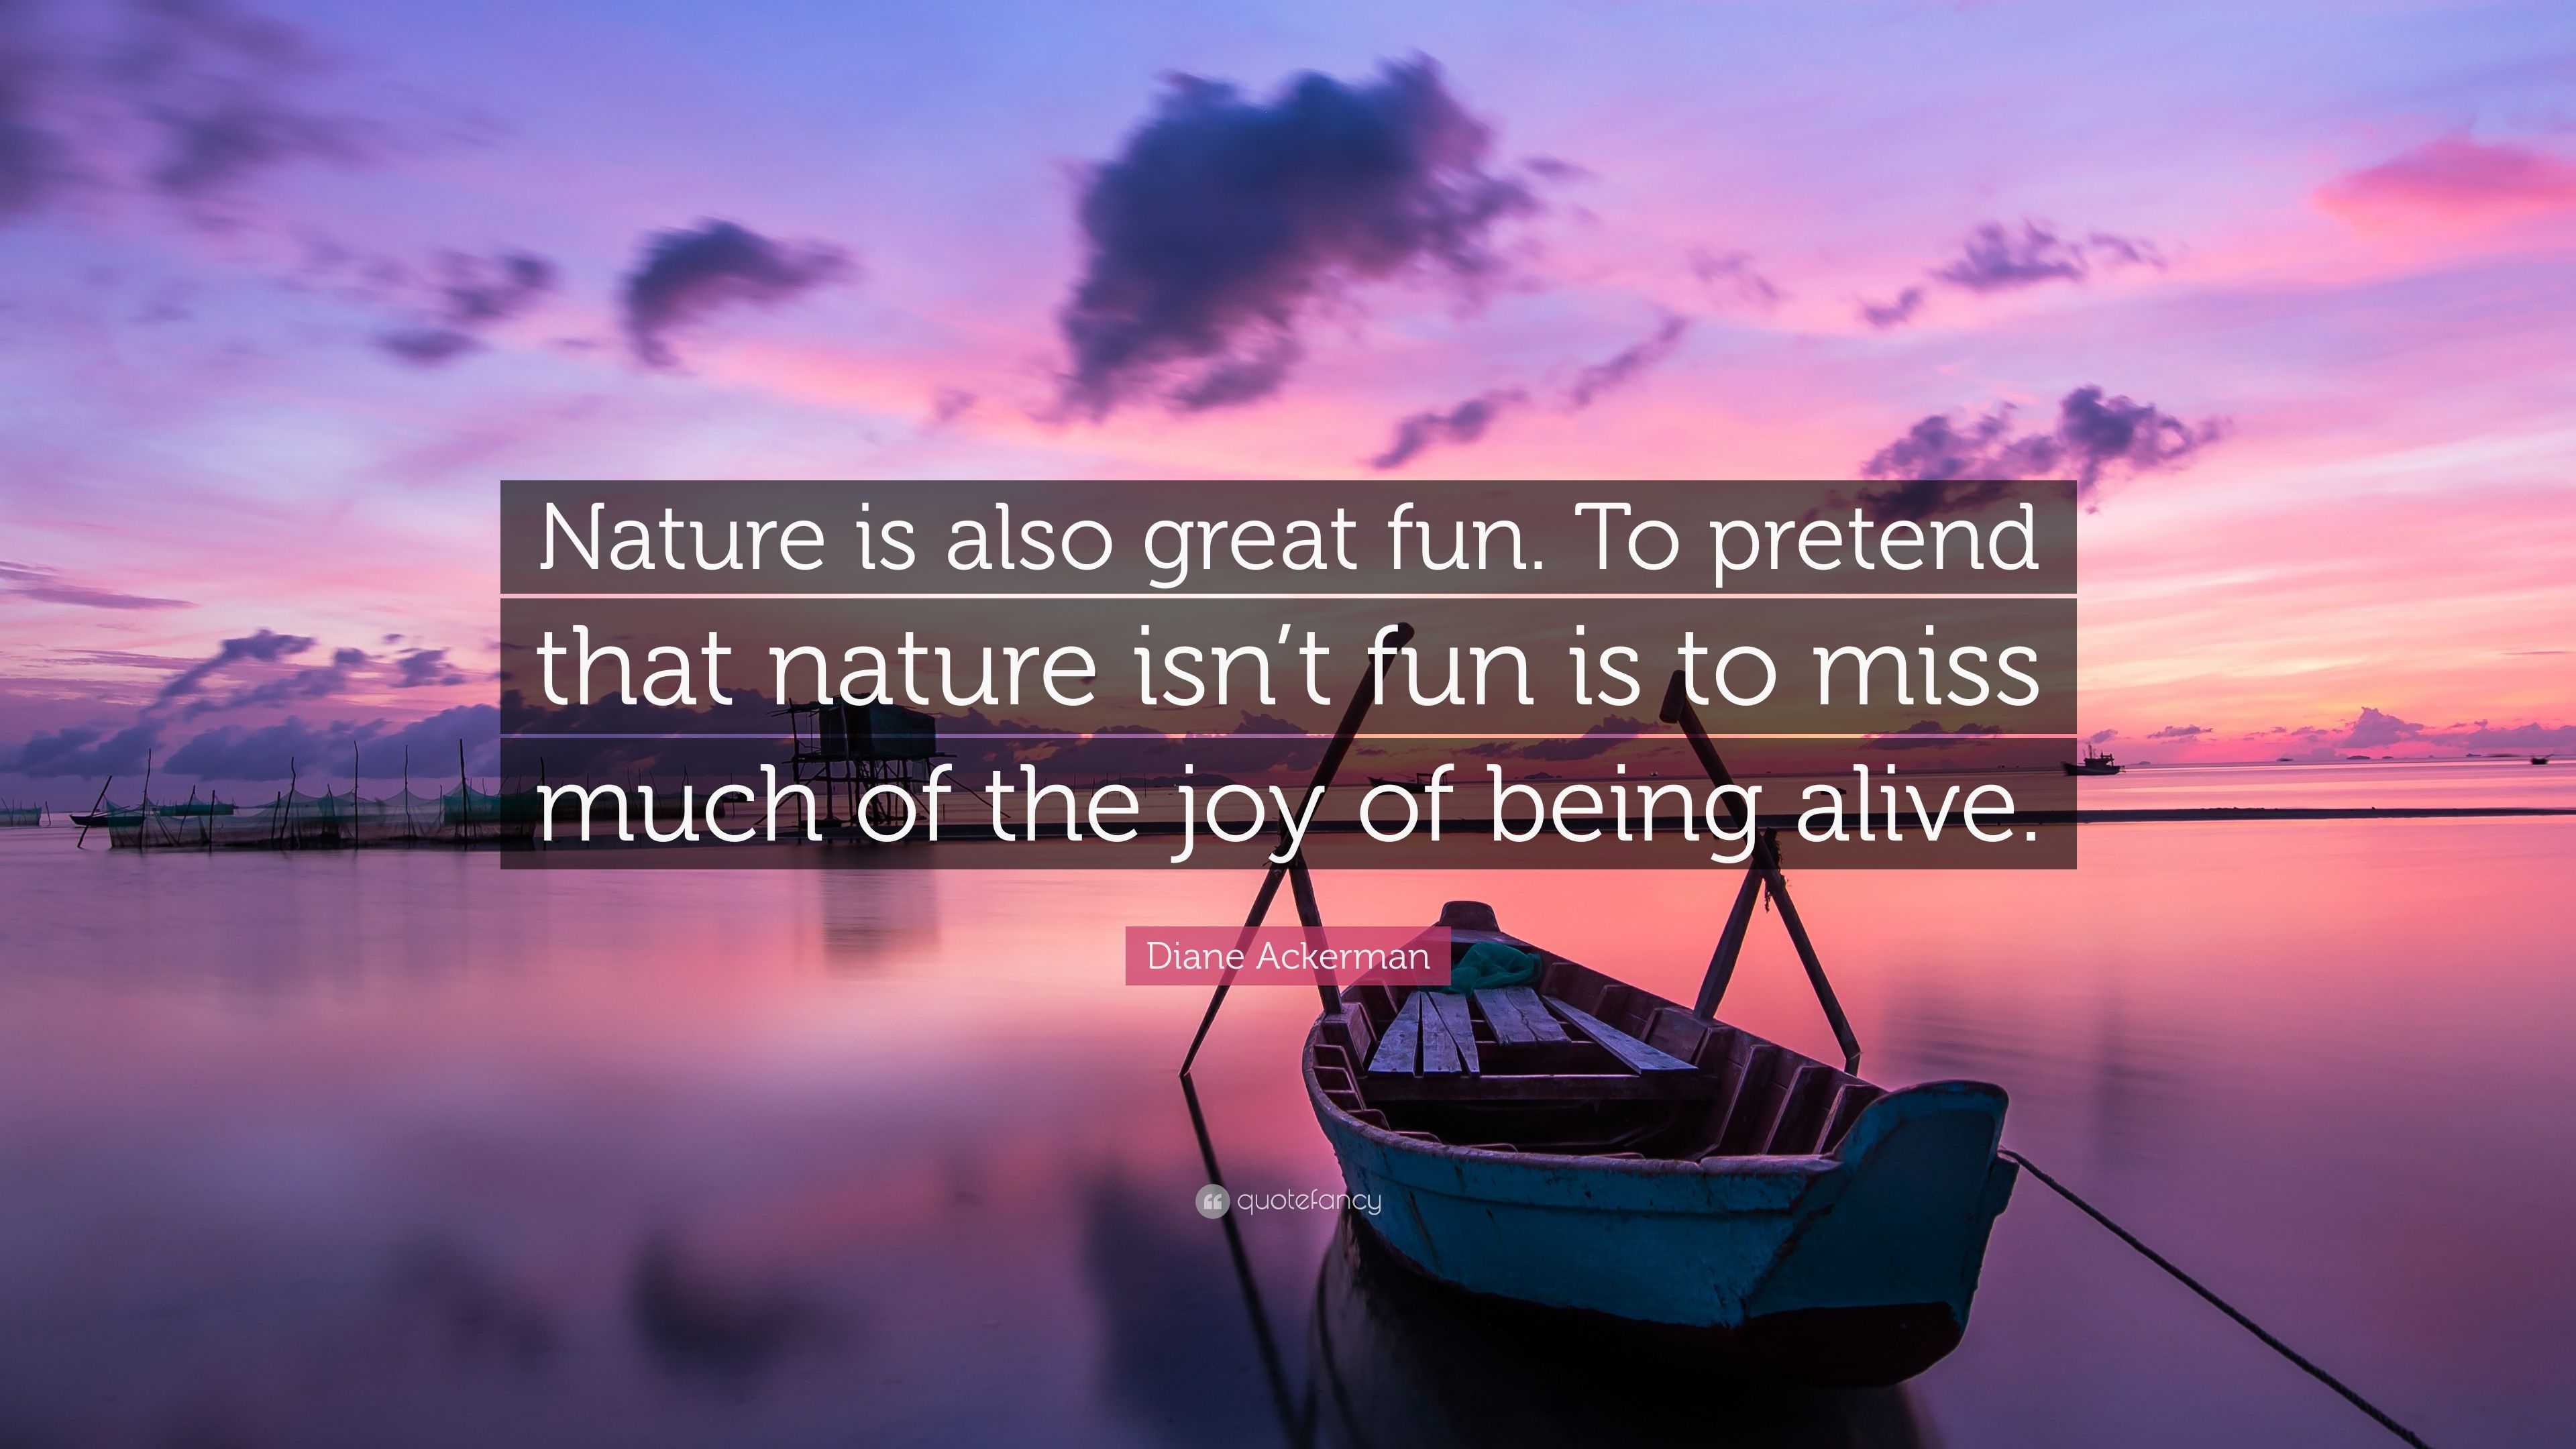 Diane Ackerman Quote: “Nature is also great fun. To pretend that nature ...